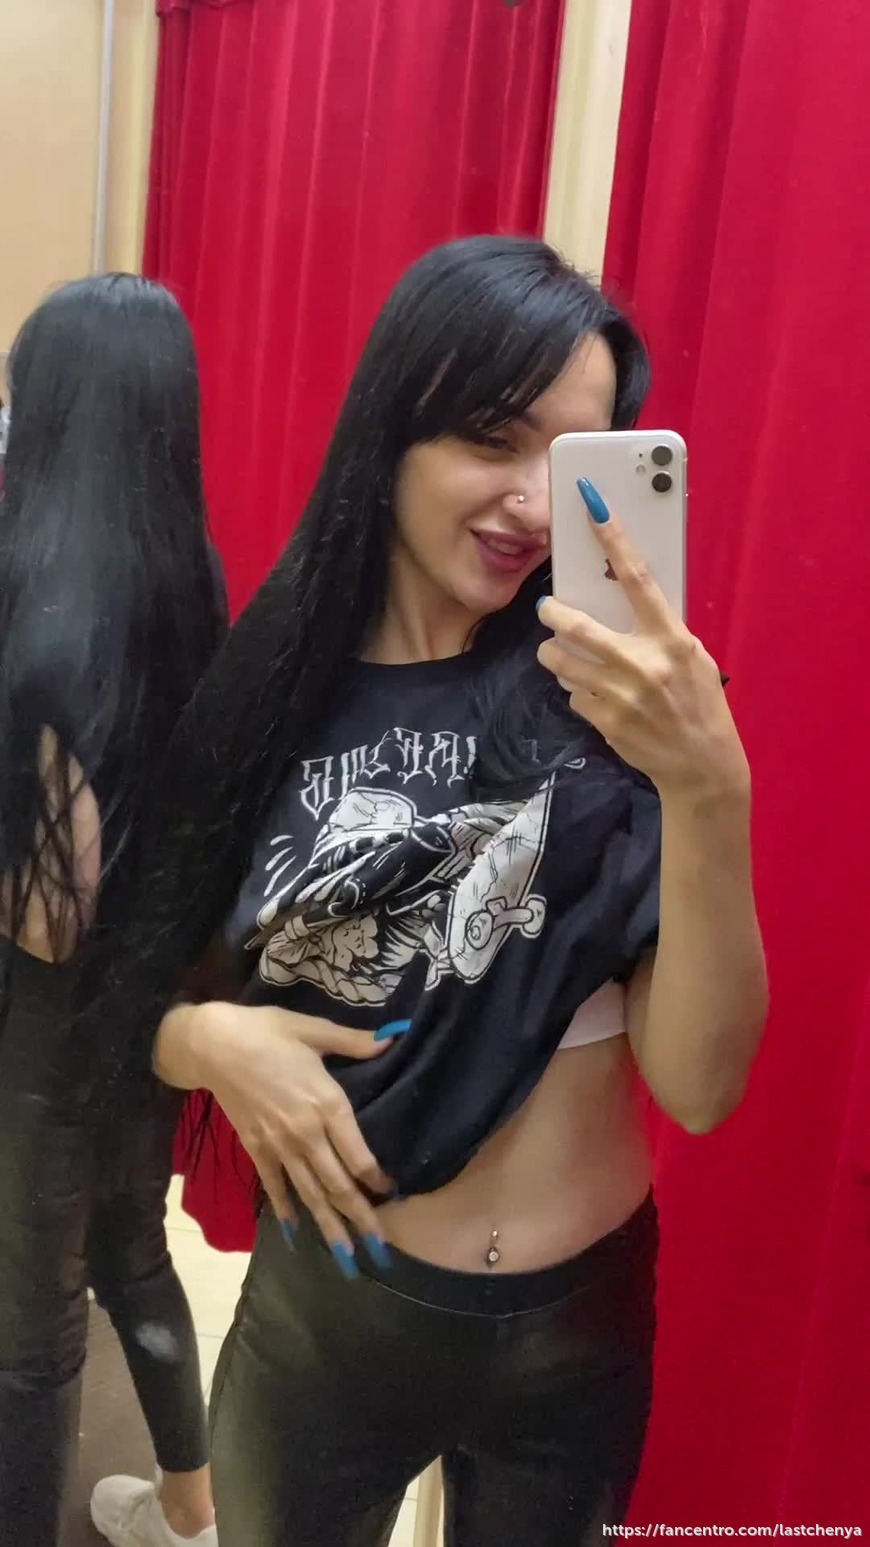 Wish someone would fuck me in the fittingrooms 🔞🤭